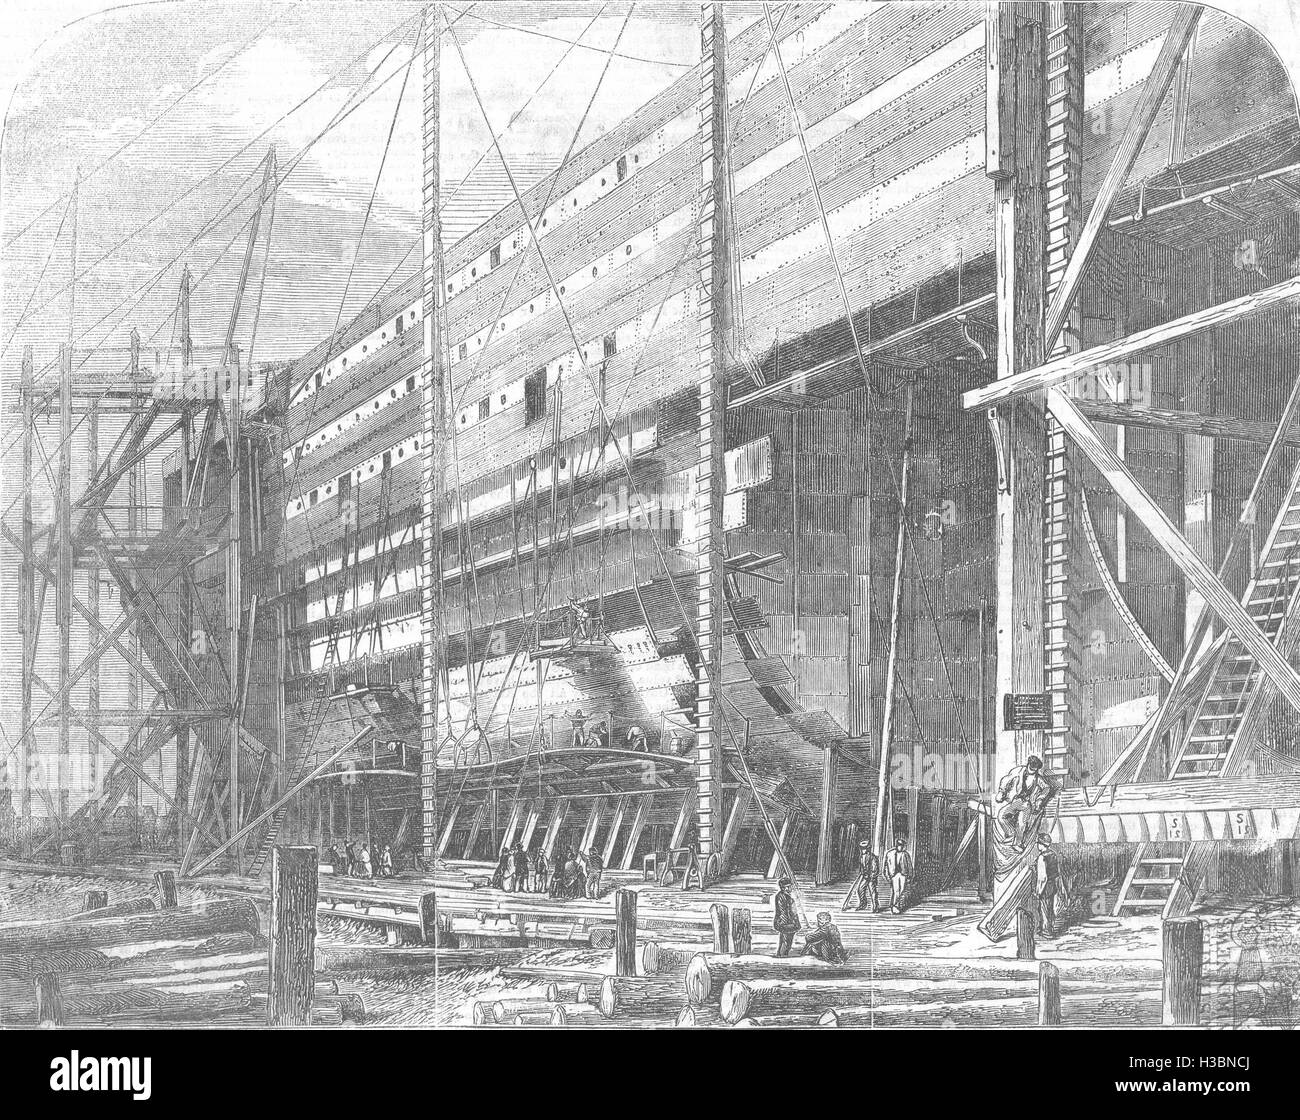 LONDON Great Eastern Ship Construction of Central compartment Millwall 1857. The Illustrated London News Stock Photo